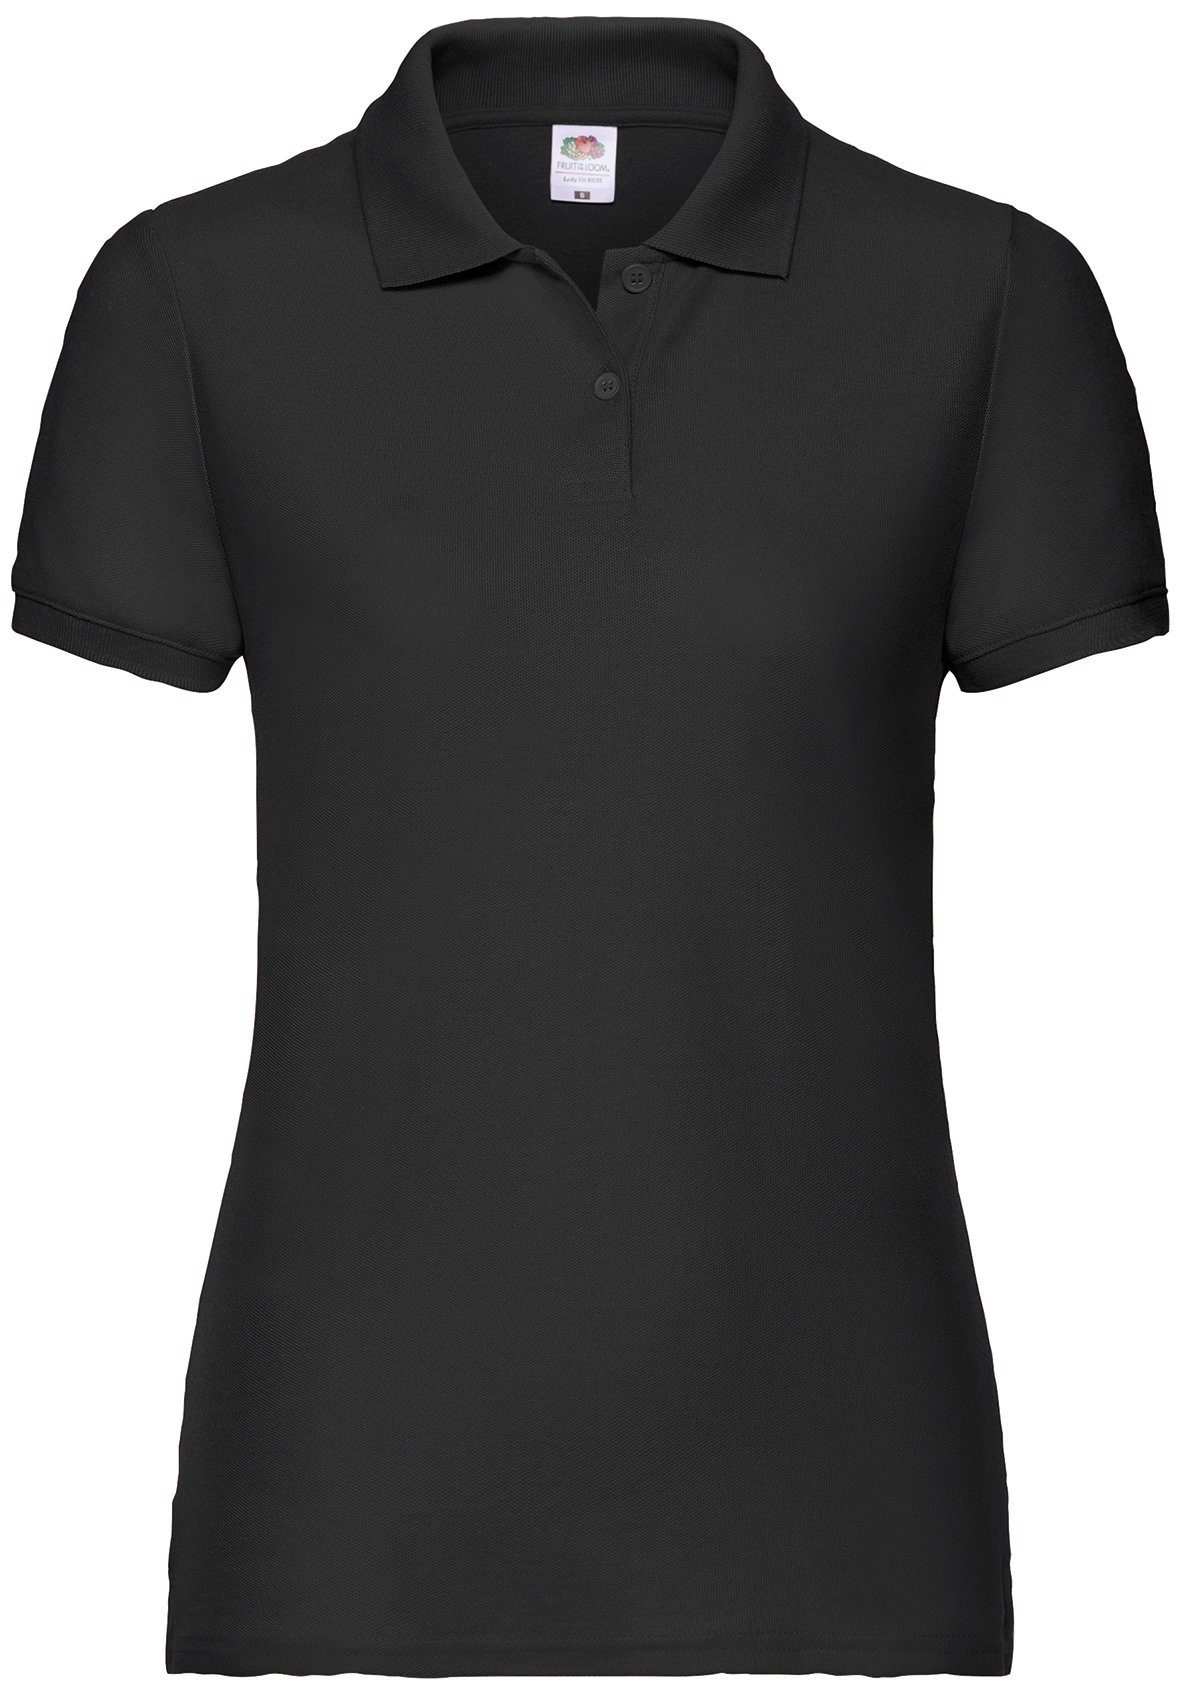 Fruit of the Loom Poloshirt Fruit of the Loom 65/35 Polo Lady-Fit schwarz